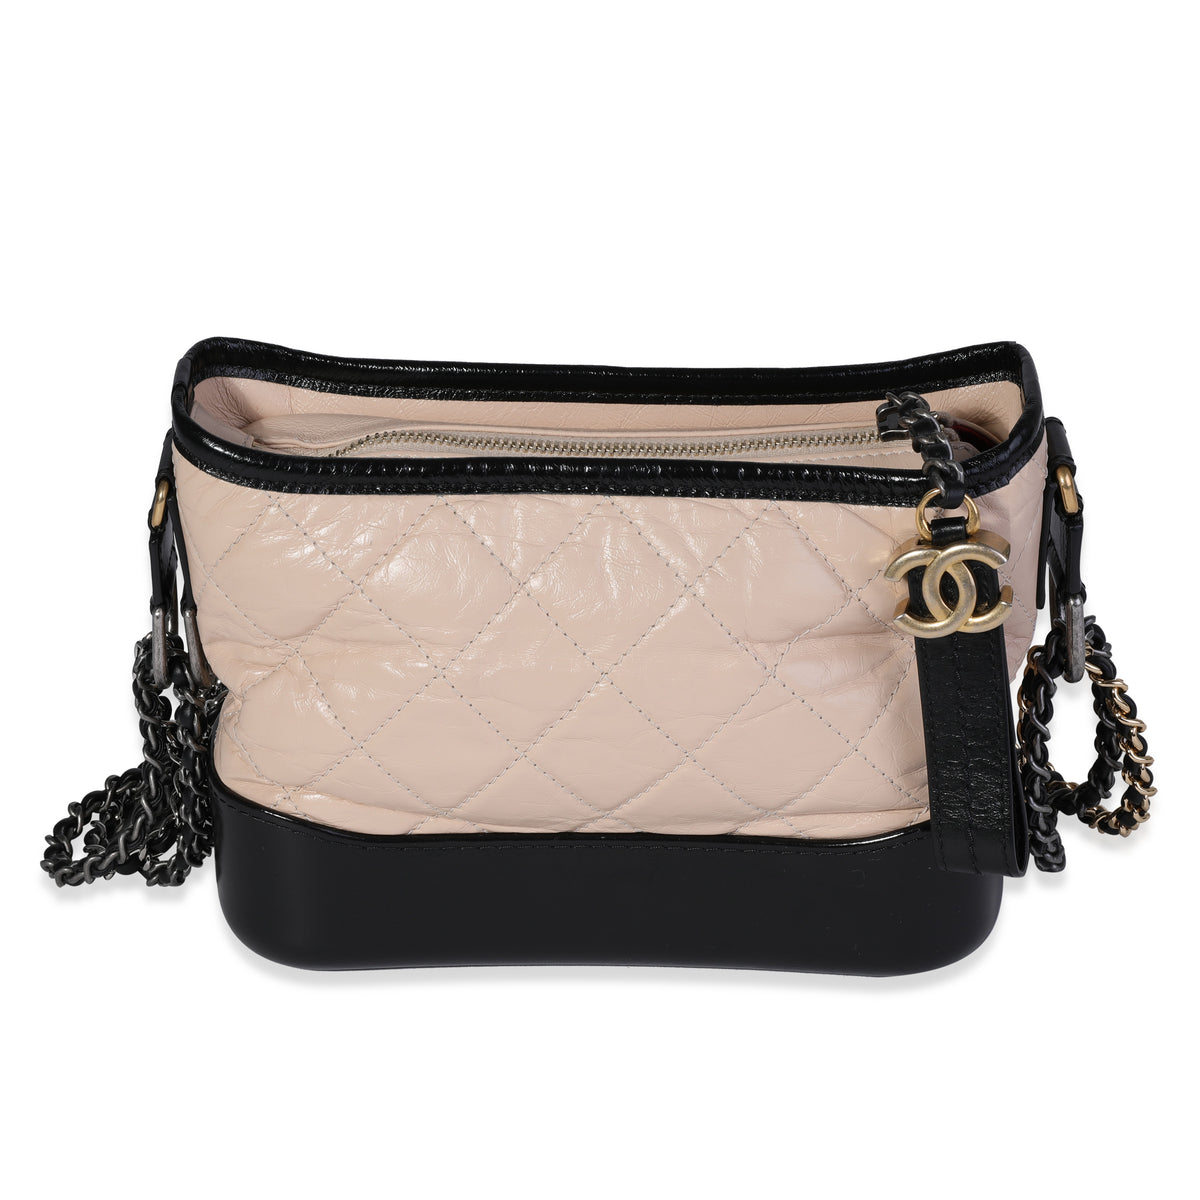 Chanel Black & White Quilted Aged Calfskin Large Gabrielle Hobo, myGemma, DE